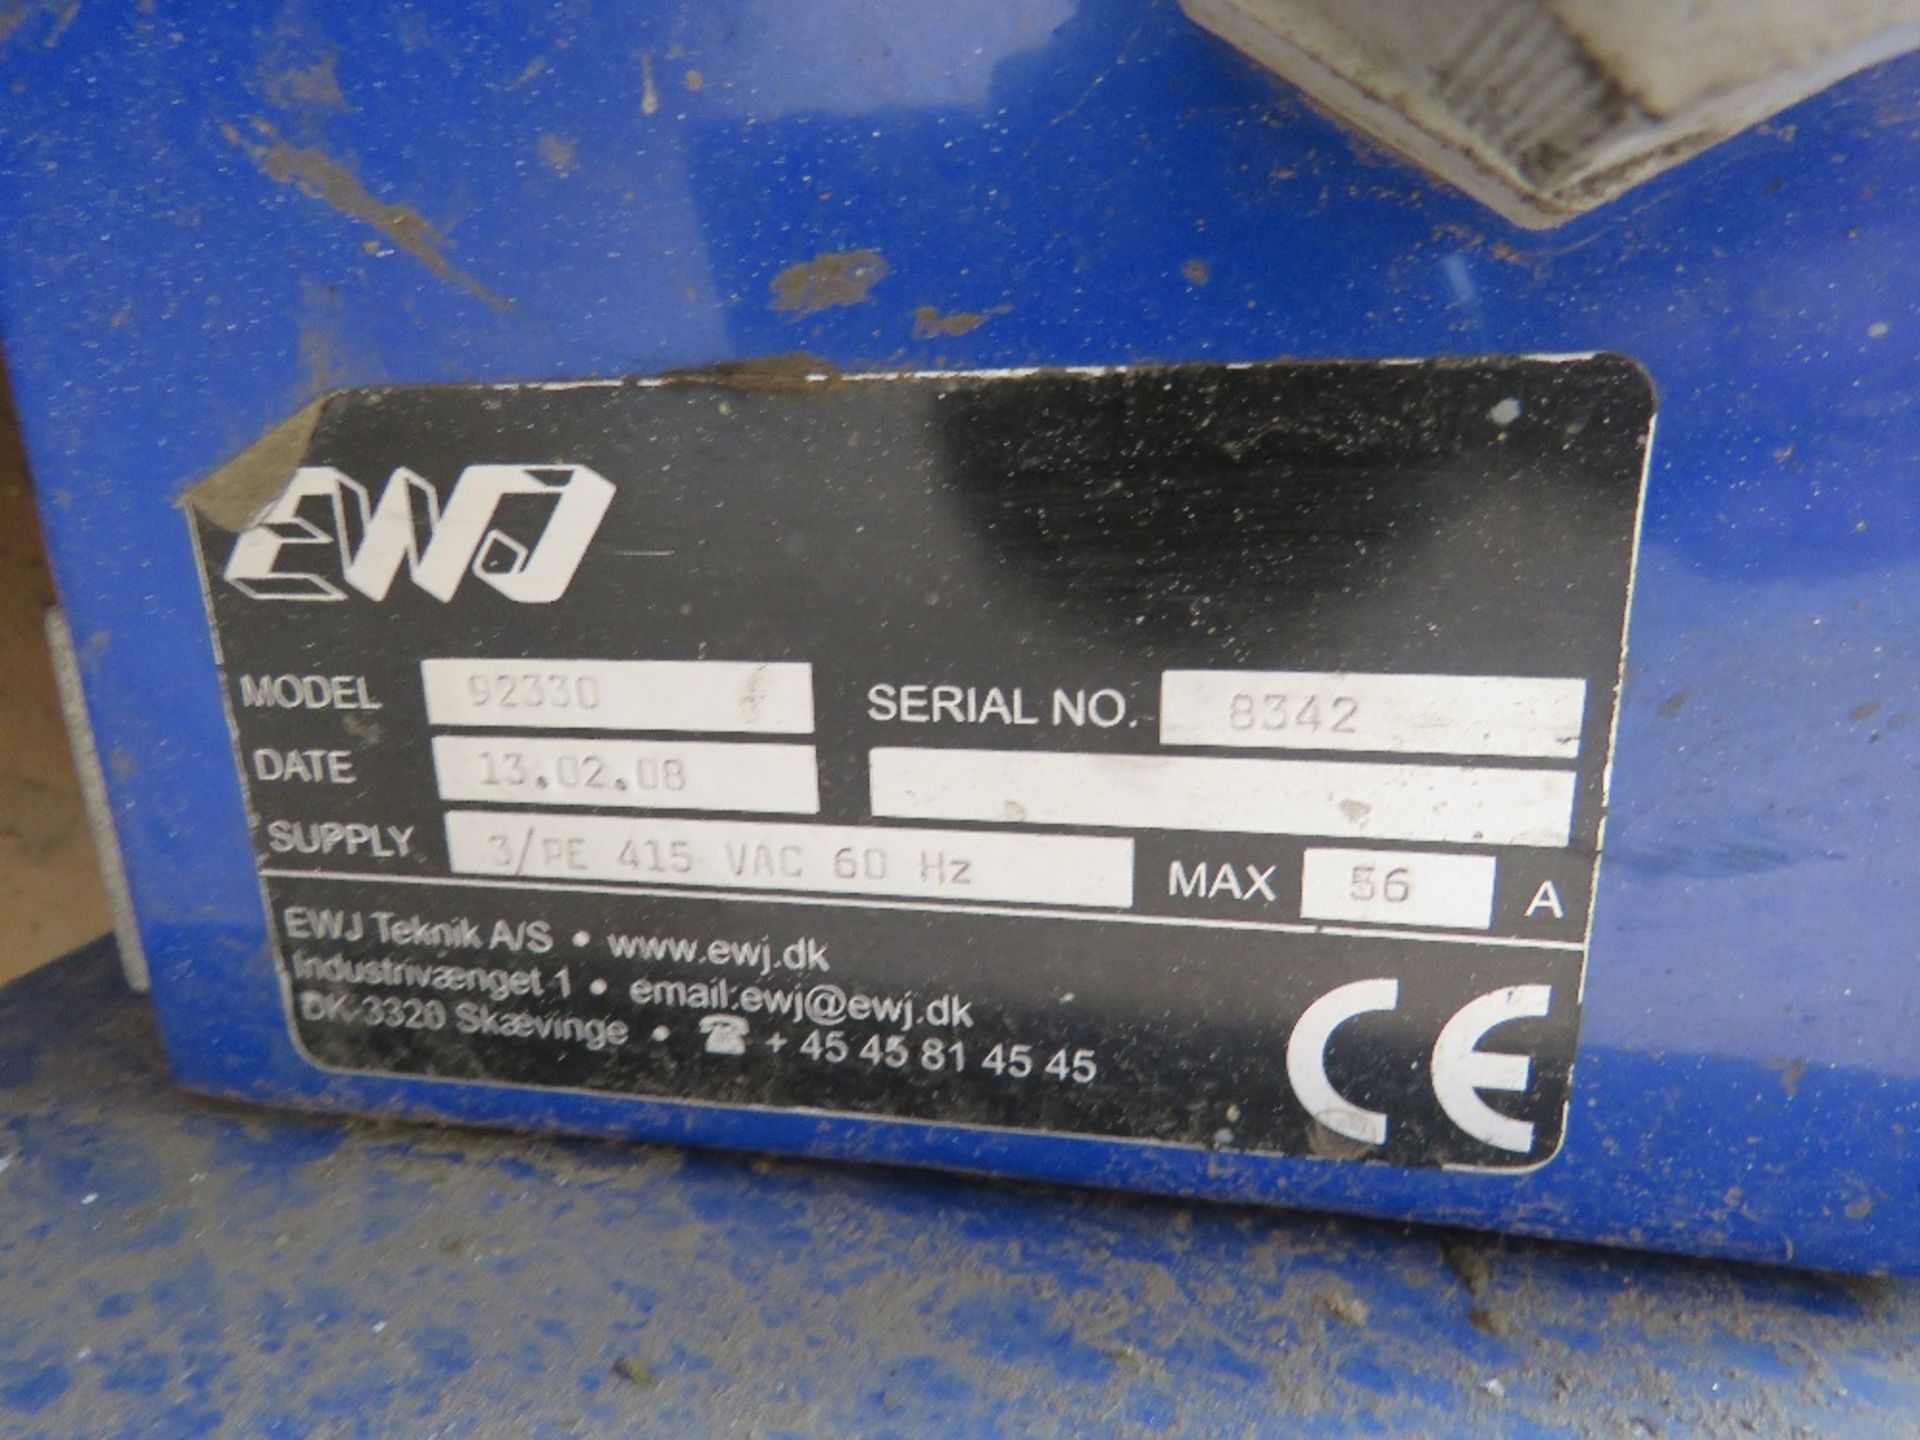 COMMERCIAL VEHICLE BRAKE TEST ROLLERS WITH ASSOCIATED EQUIPMENT. BELIEVED TO BE EWJ MAKE. - Image 15 of 15